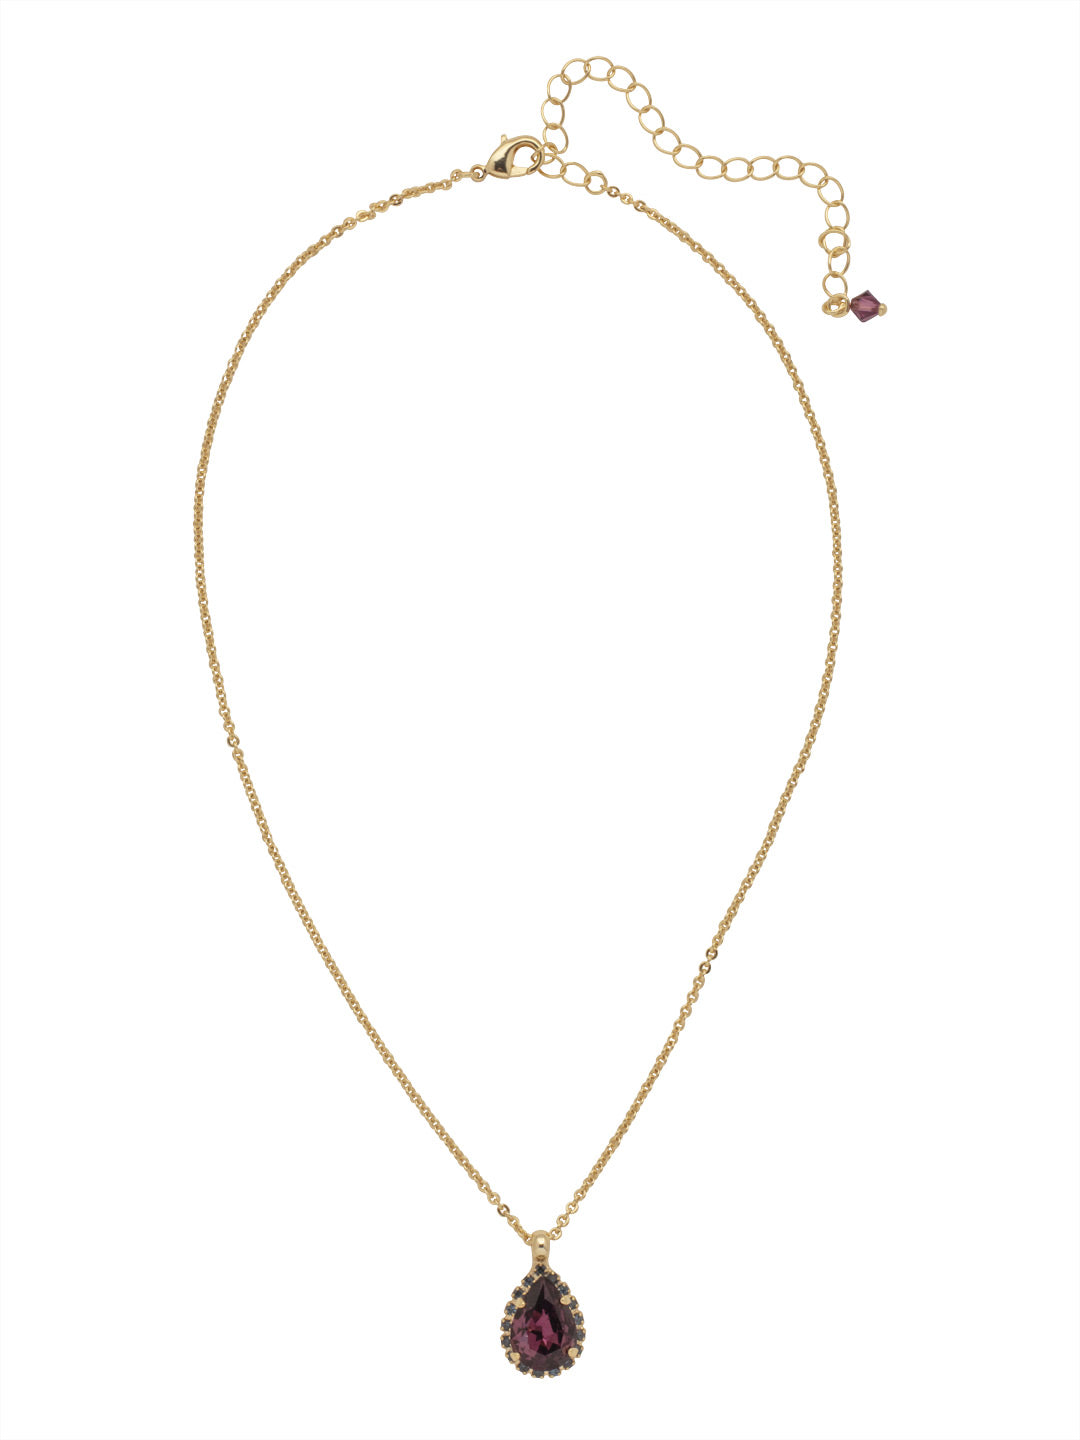 Rain Droplet  Necklace - NDY16BGROP - <p>A delicate pear shaped crystal with a decorative rhinestone border adds just the right amount of sparkle and shine! From Sorrelli's Royal Plum collection in our Bright Gold-tone finish.</p>